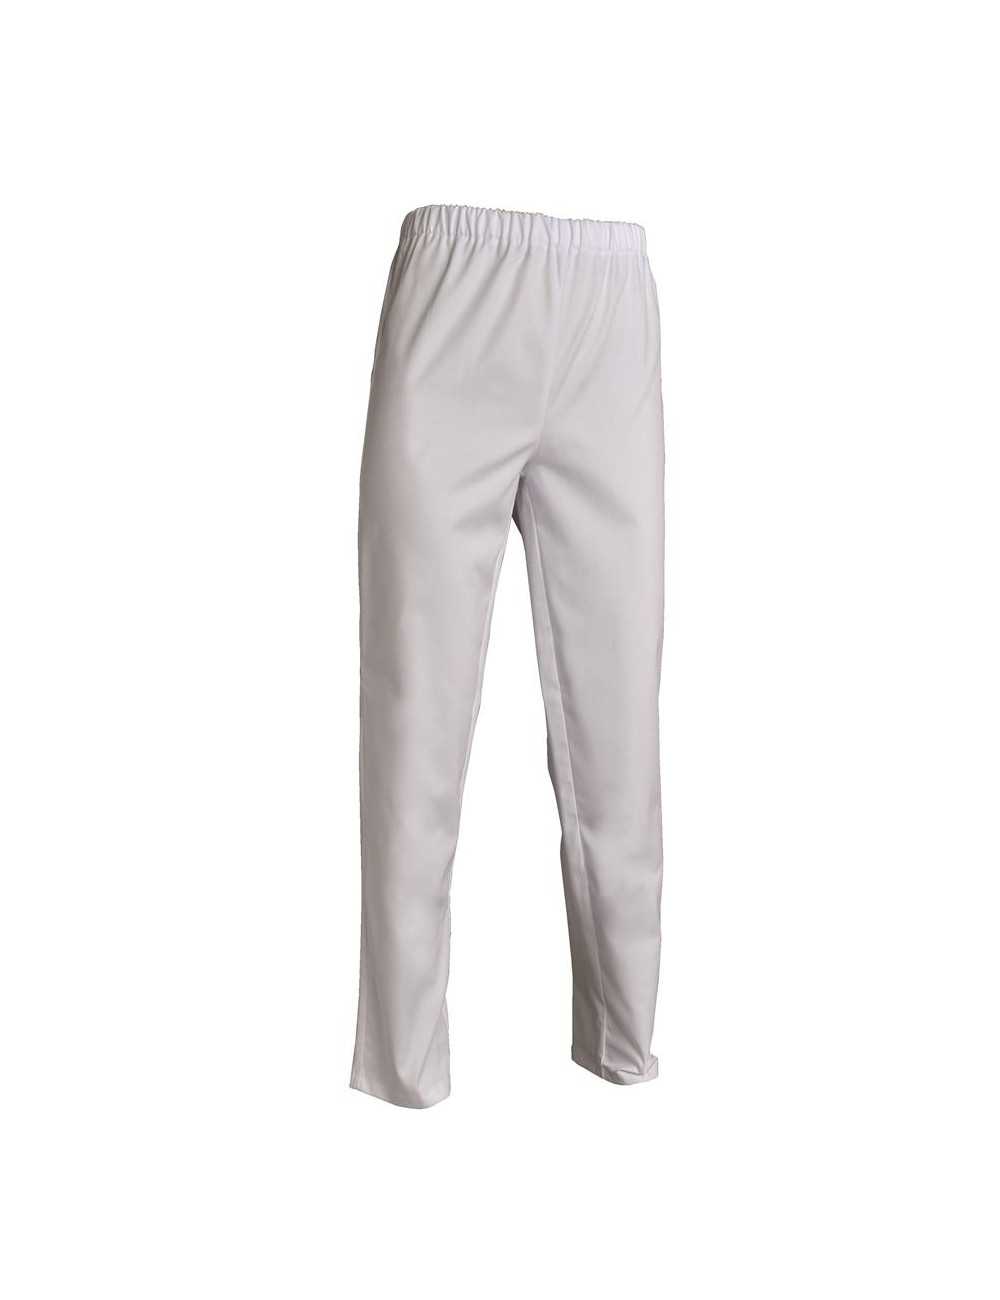 White poly/cotton work pants André, SNV